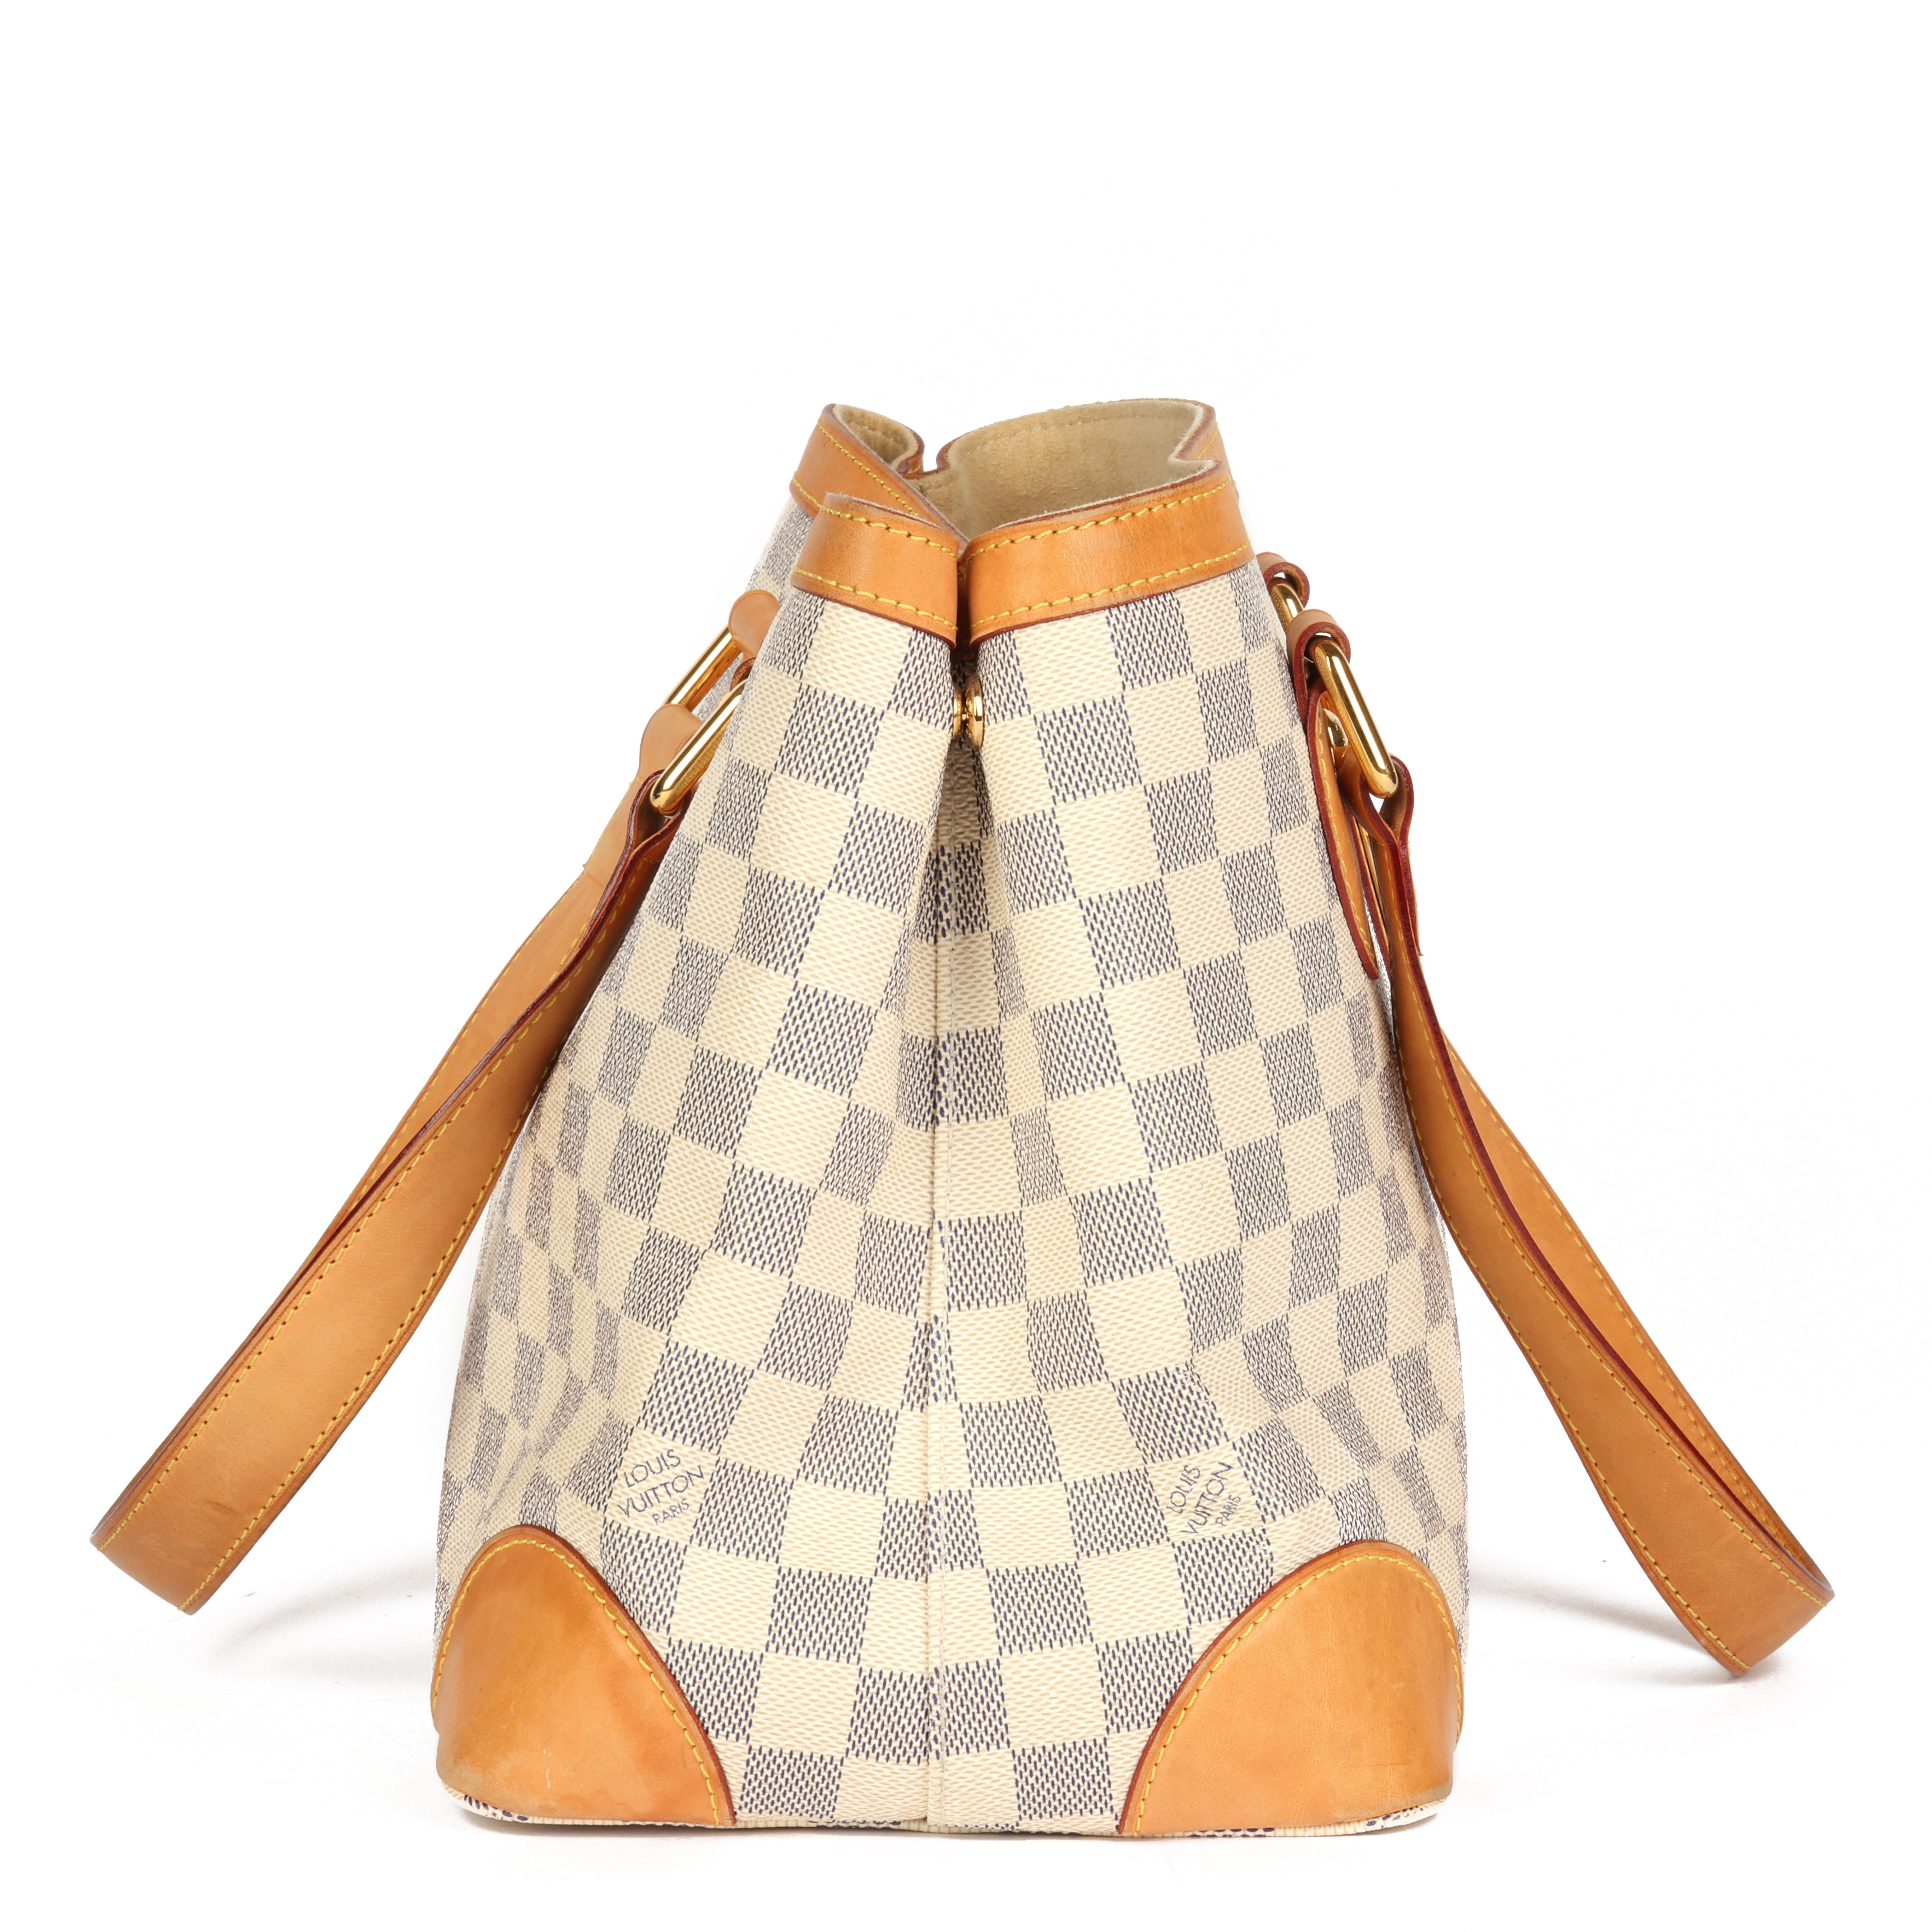 LOUIS VUITTON
Damier Azur Coated Canvas & Vachetta Leather Hampstead PM

Serial Number: Unreadable due to suede
Age (Circa): 2010
Accompanied By: Louis Vuitton Dust Bag
Authenticity Details: Date Stamp (Made in France)
Gender: Ladies
Type: